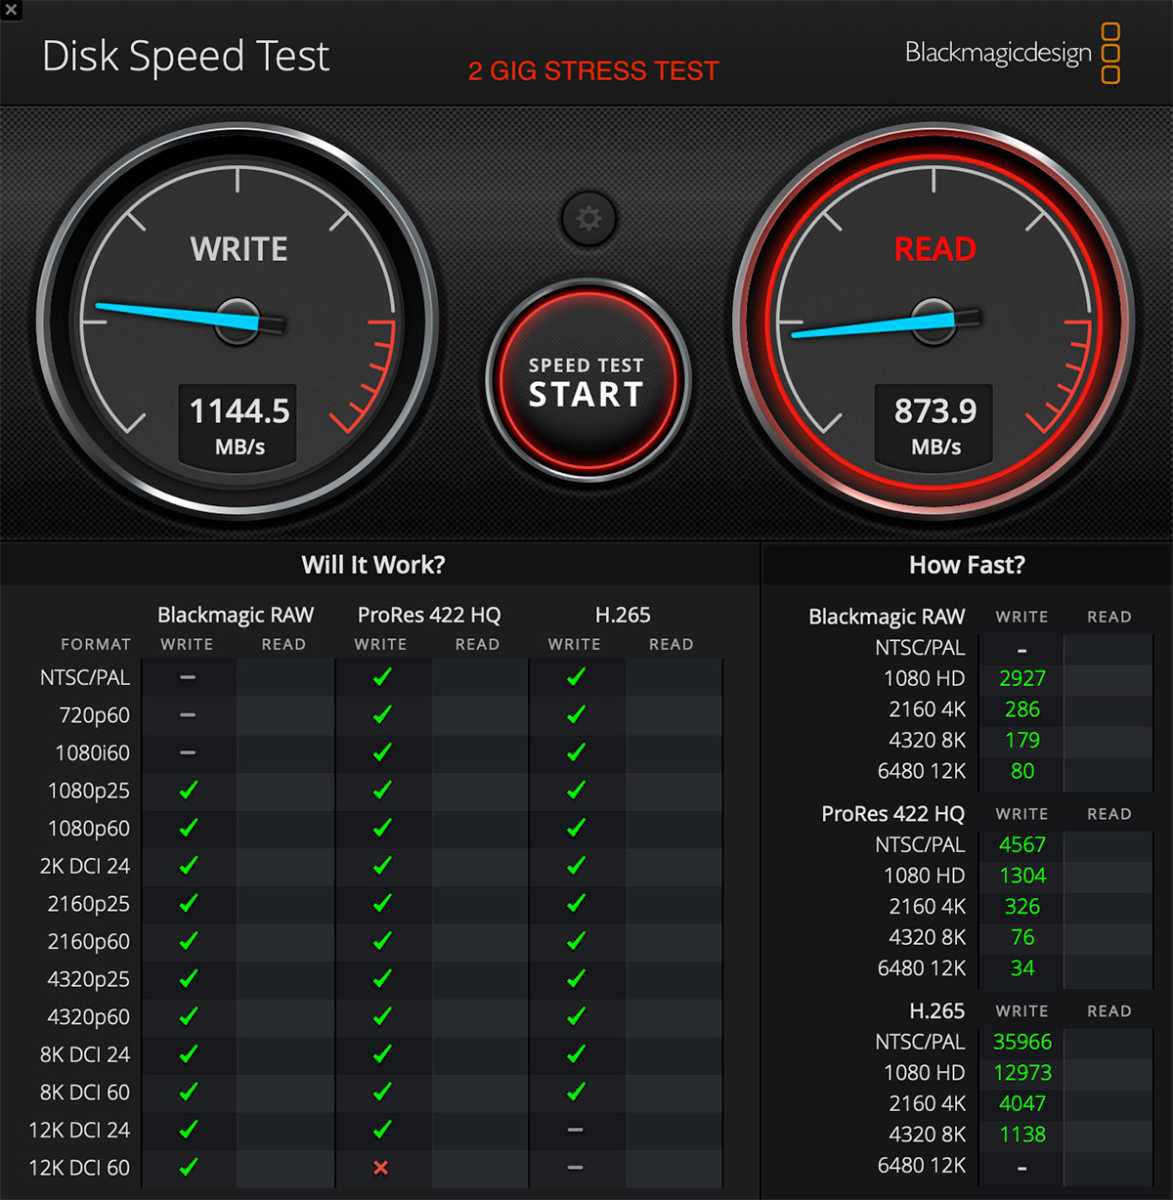 Satechi Stand and Hub NVMe SSD tests